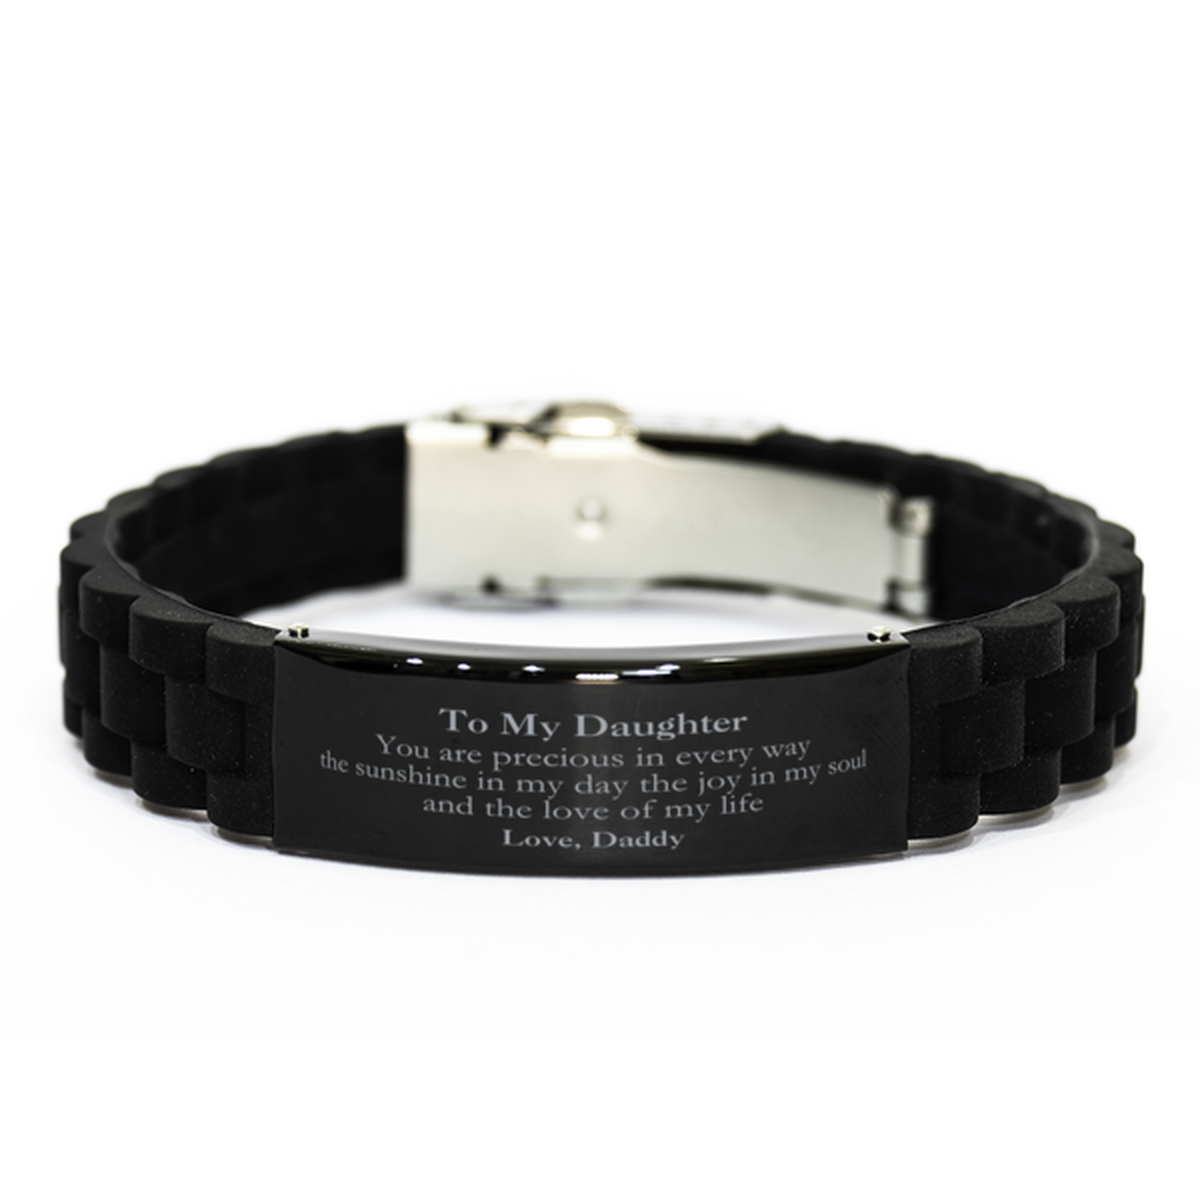 Graduation Gifts for Daughter Black Glidelock Clasp Bracelet Present from Daddy, Christmas Daughter Birthday Gifts Daughter You are precious in every way the sunshine in my day. Love, Daddy